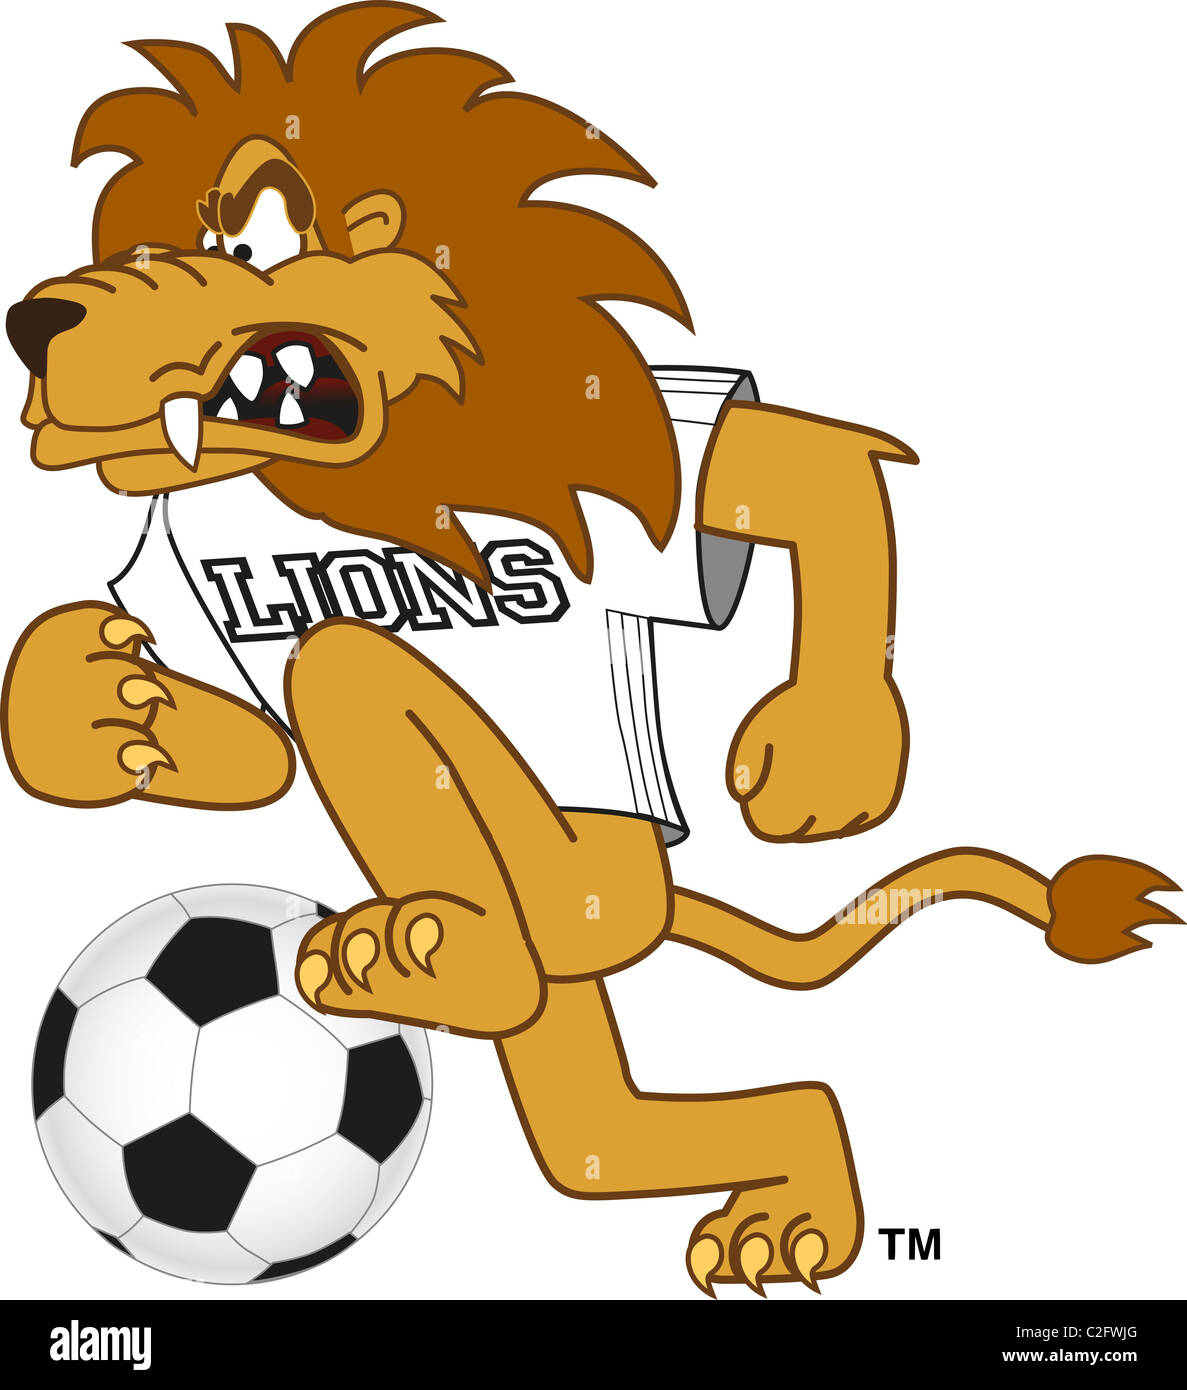 Lion Mascot Playing Soccer or Football Stock Photo